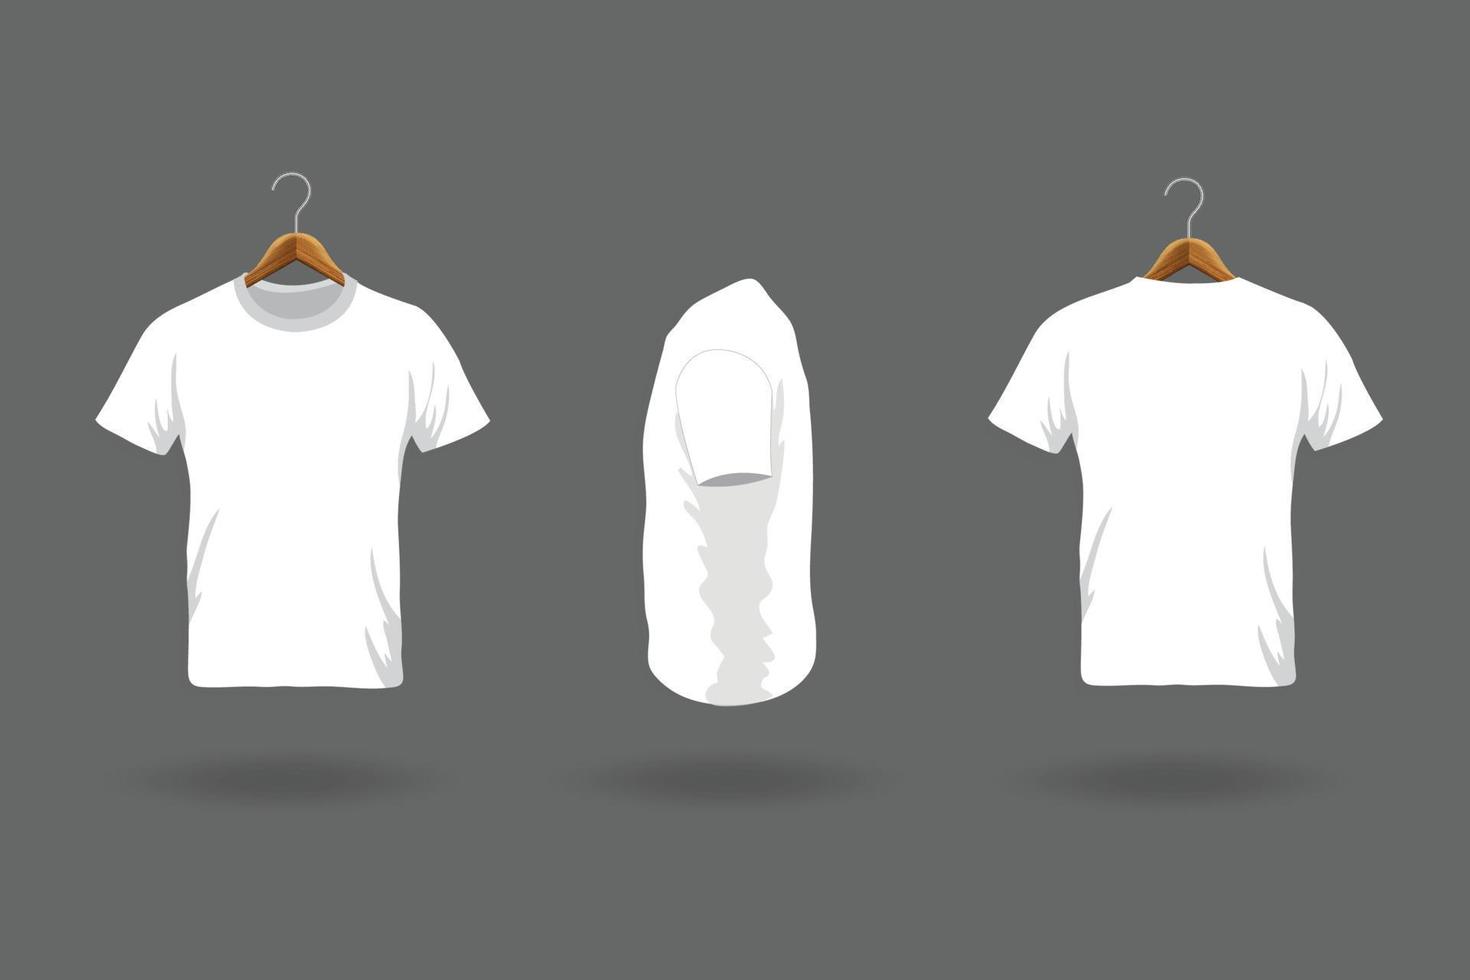 Free Vector  Men's black t-shirt in different views with realistic style